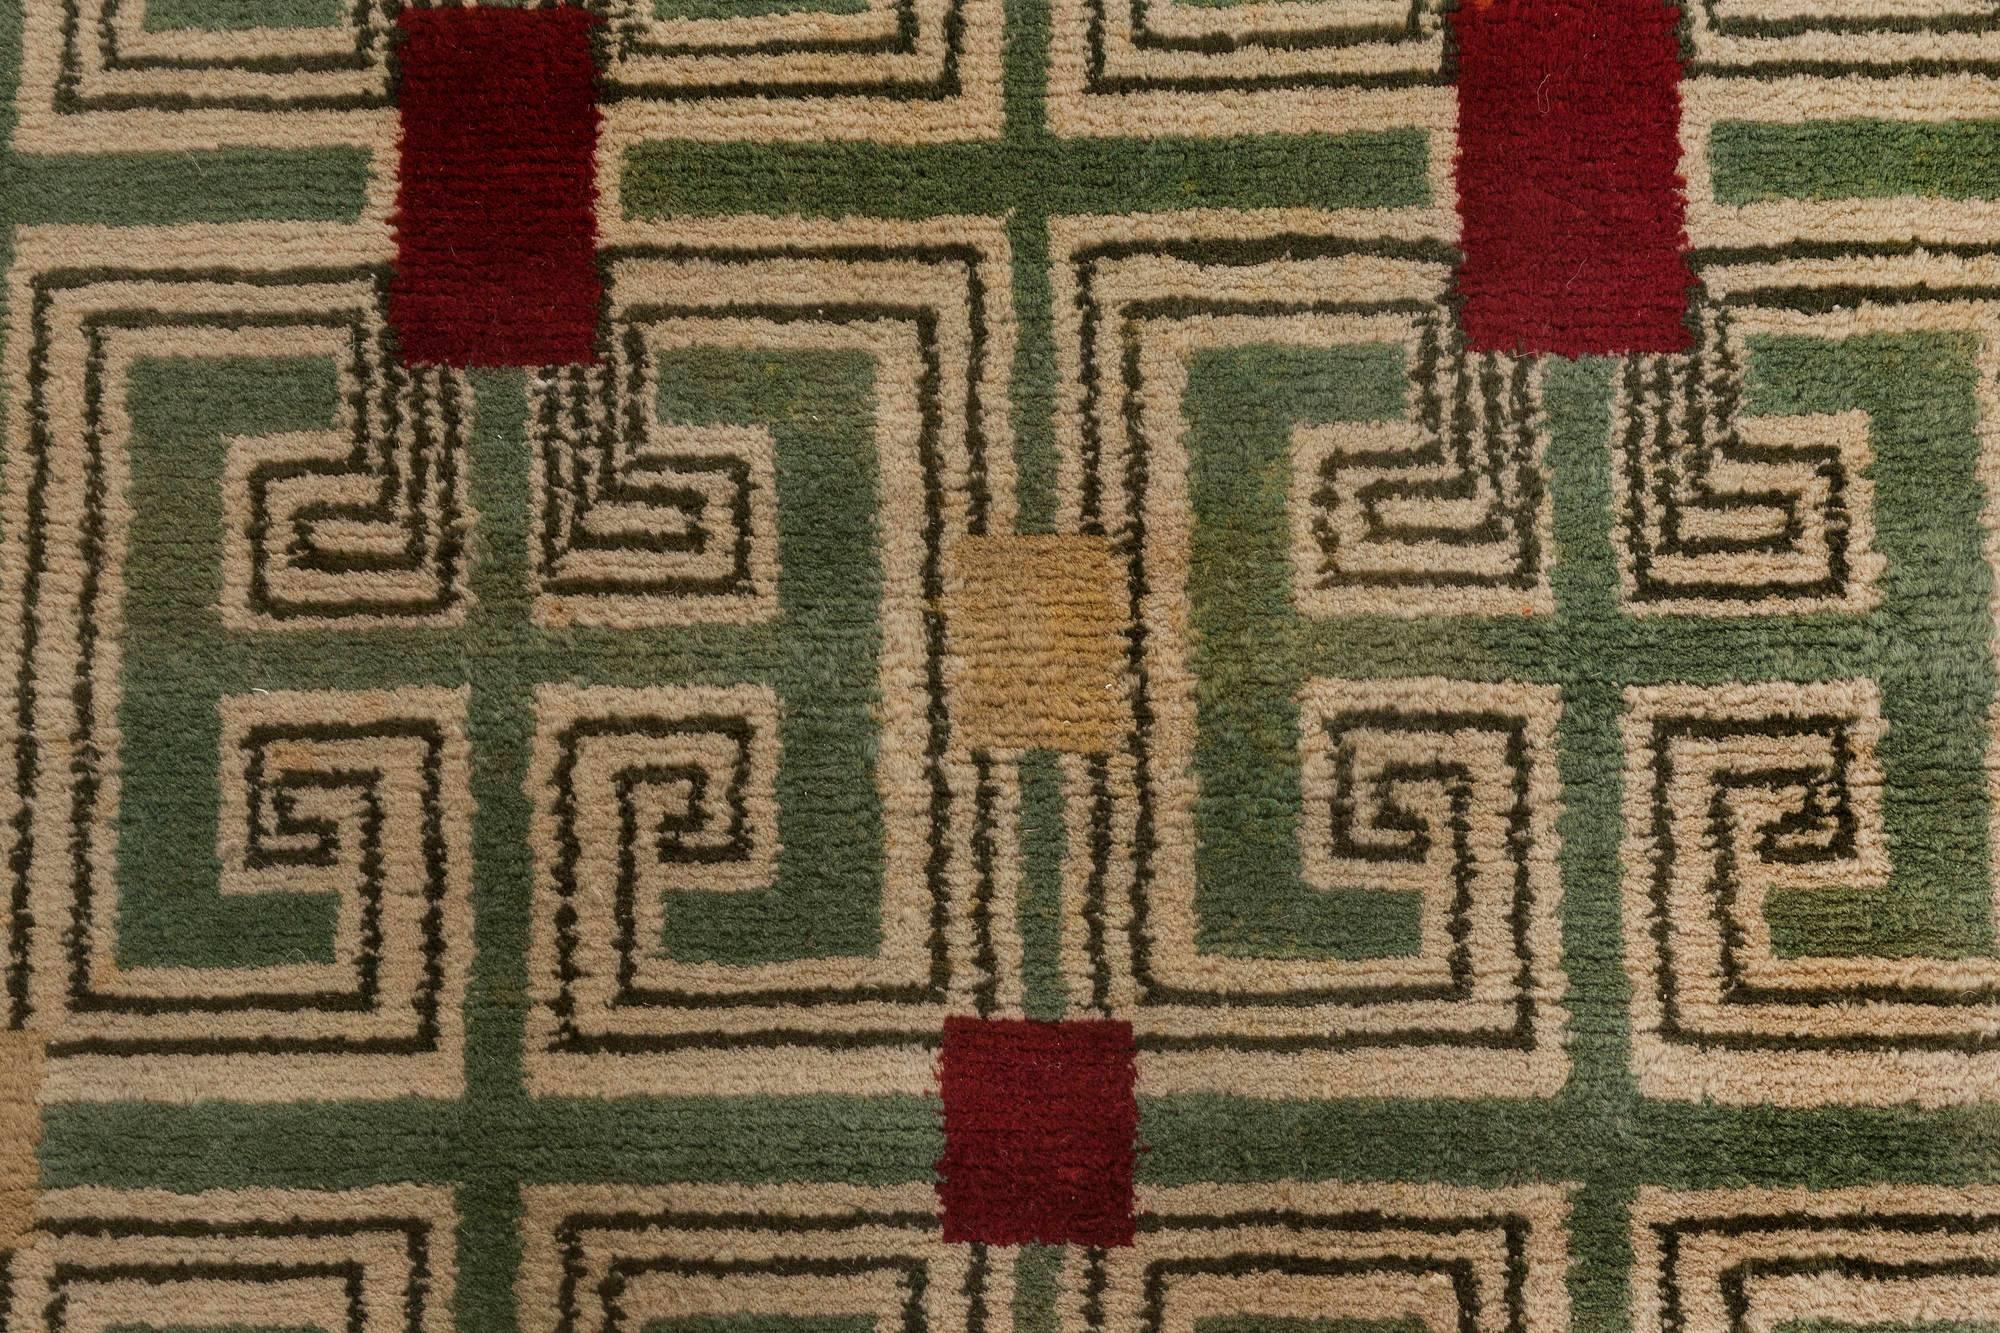 Green vintage French deco rug by Paule Leleu
Size: 6'8